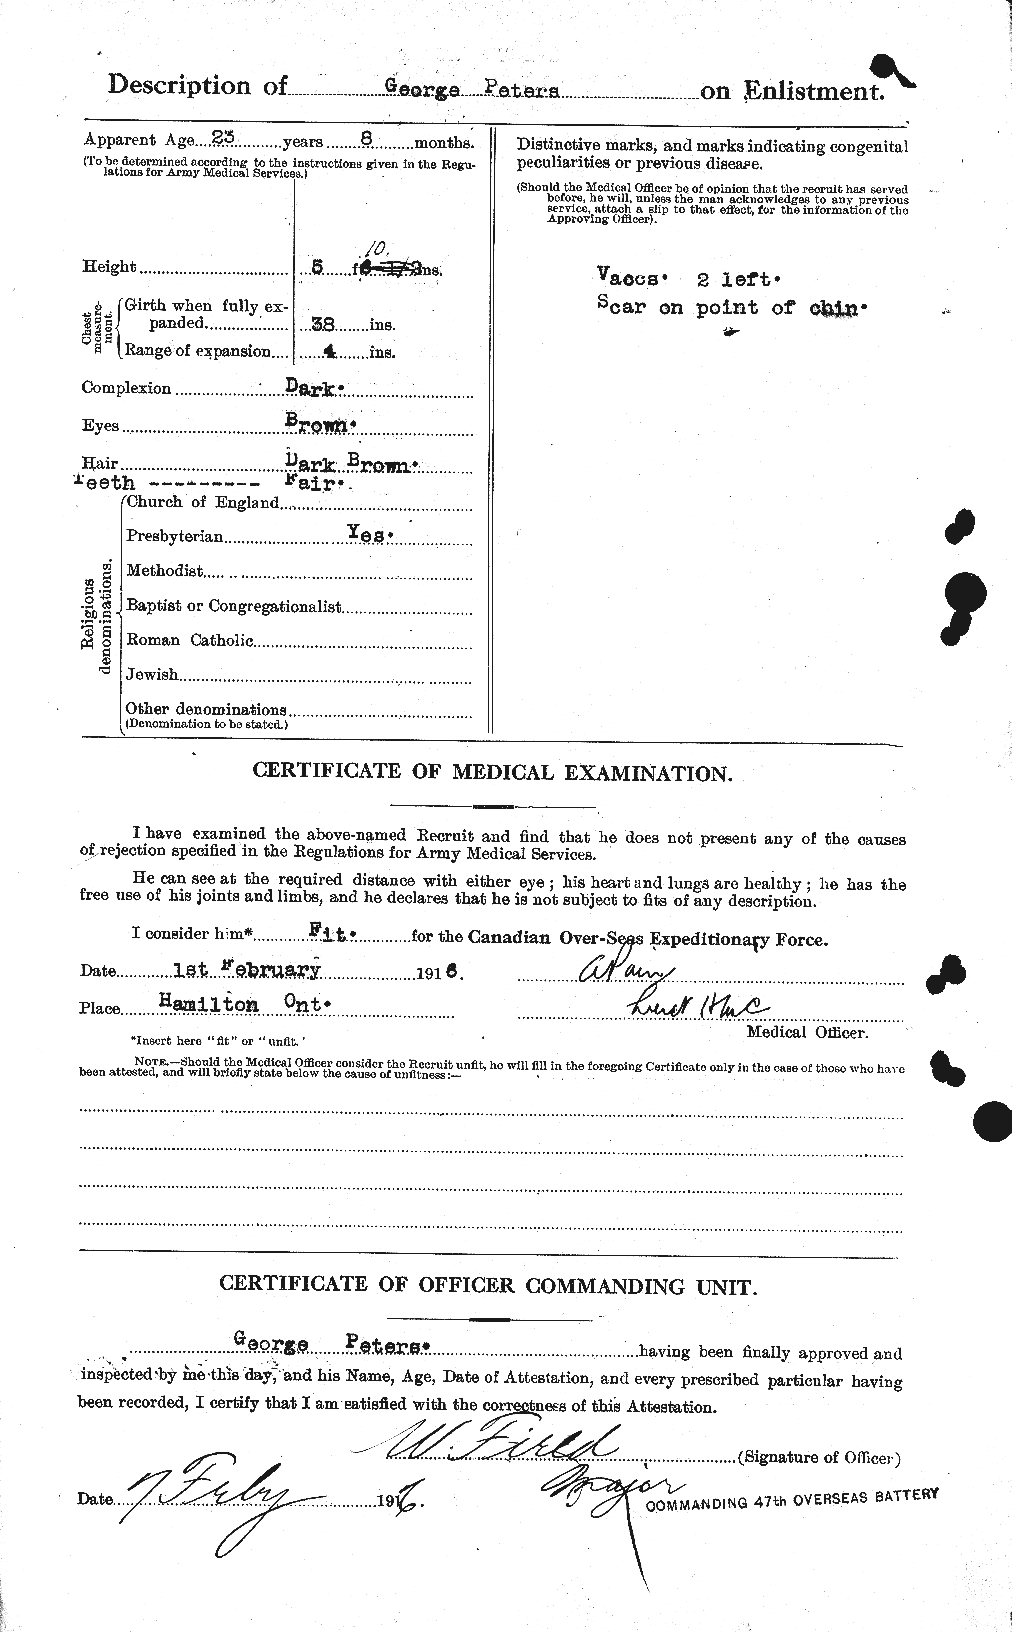 Personnel Records of the First World War - CEF 575447b